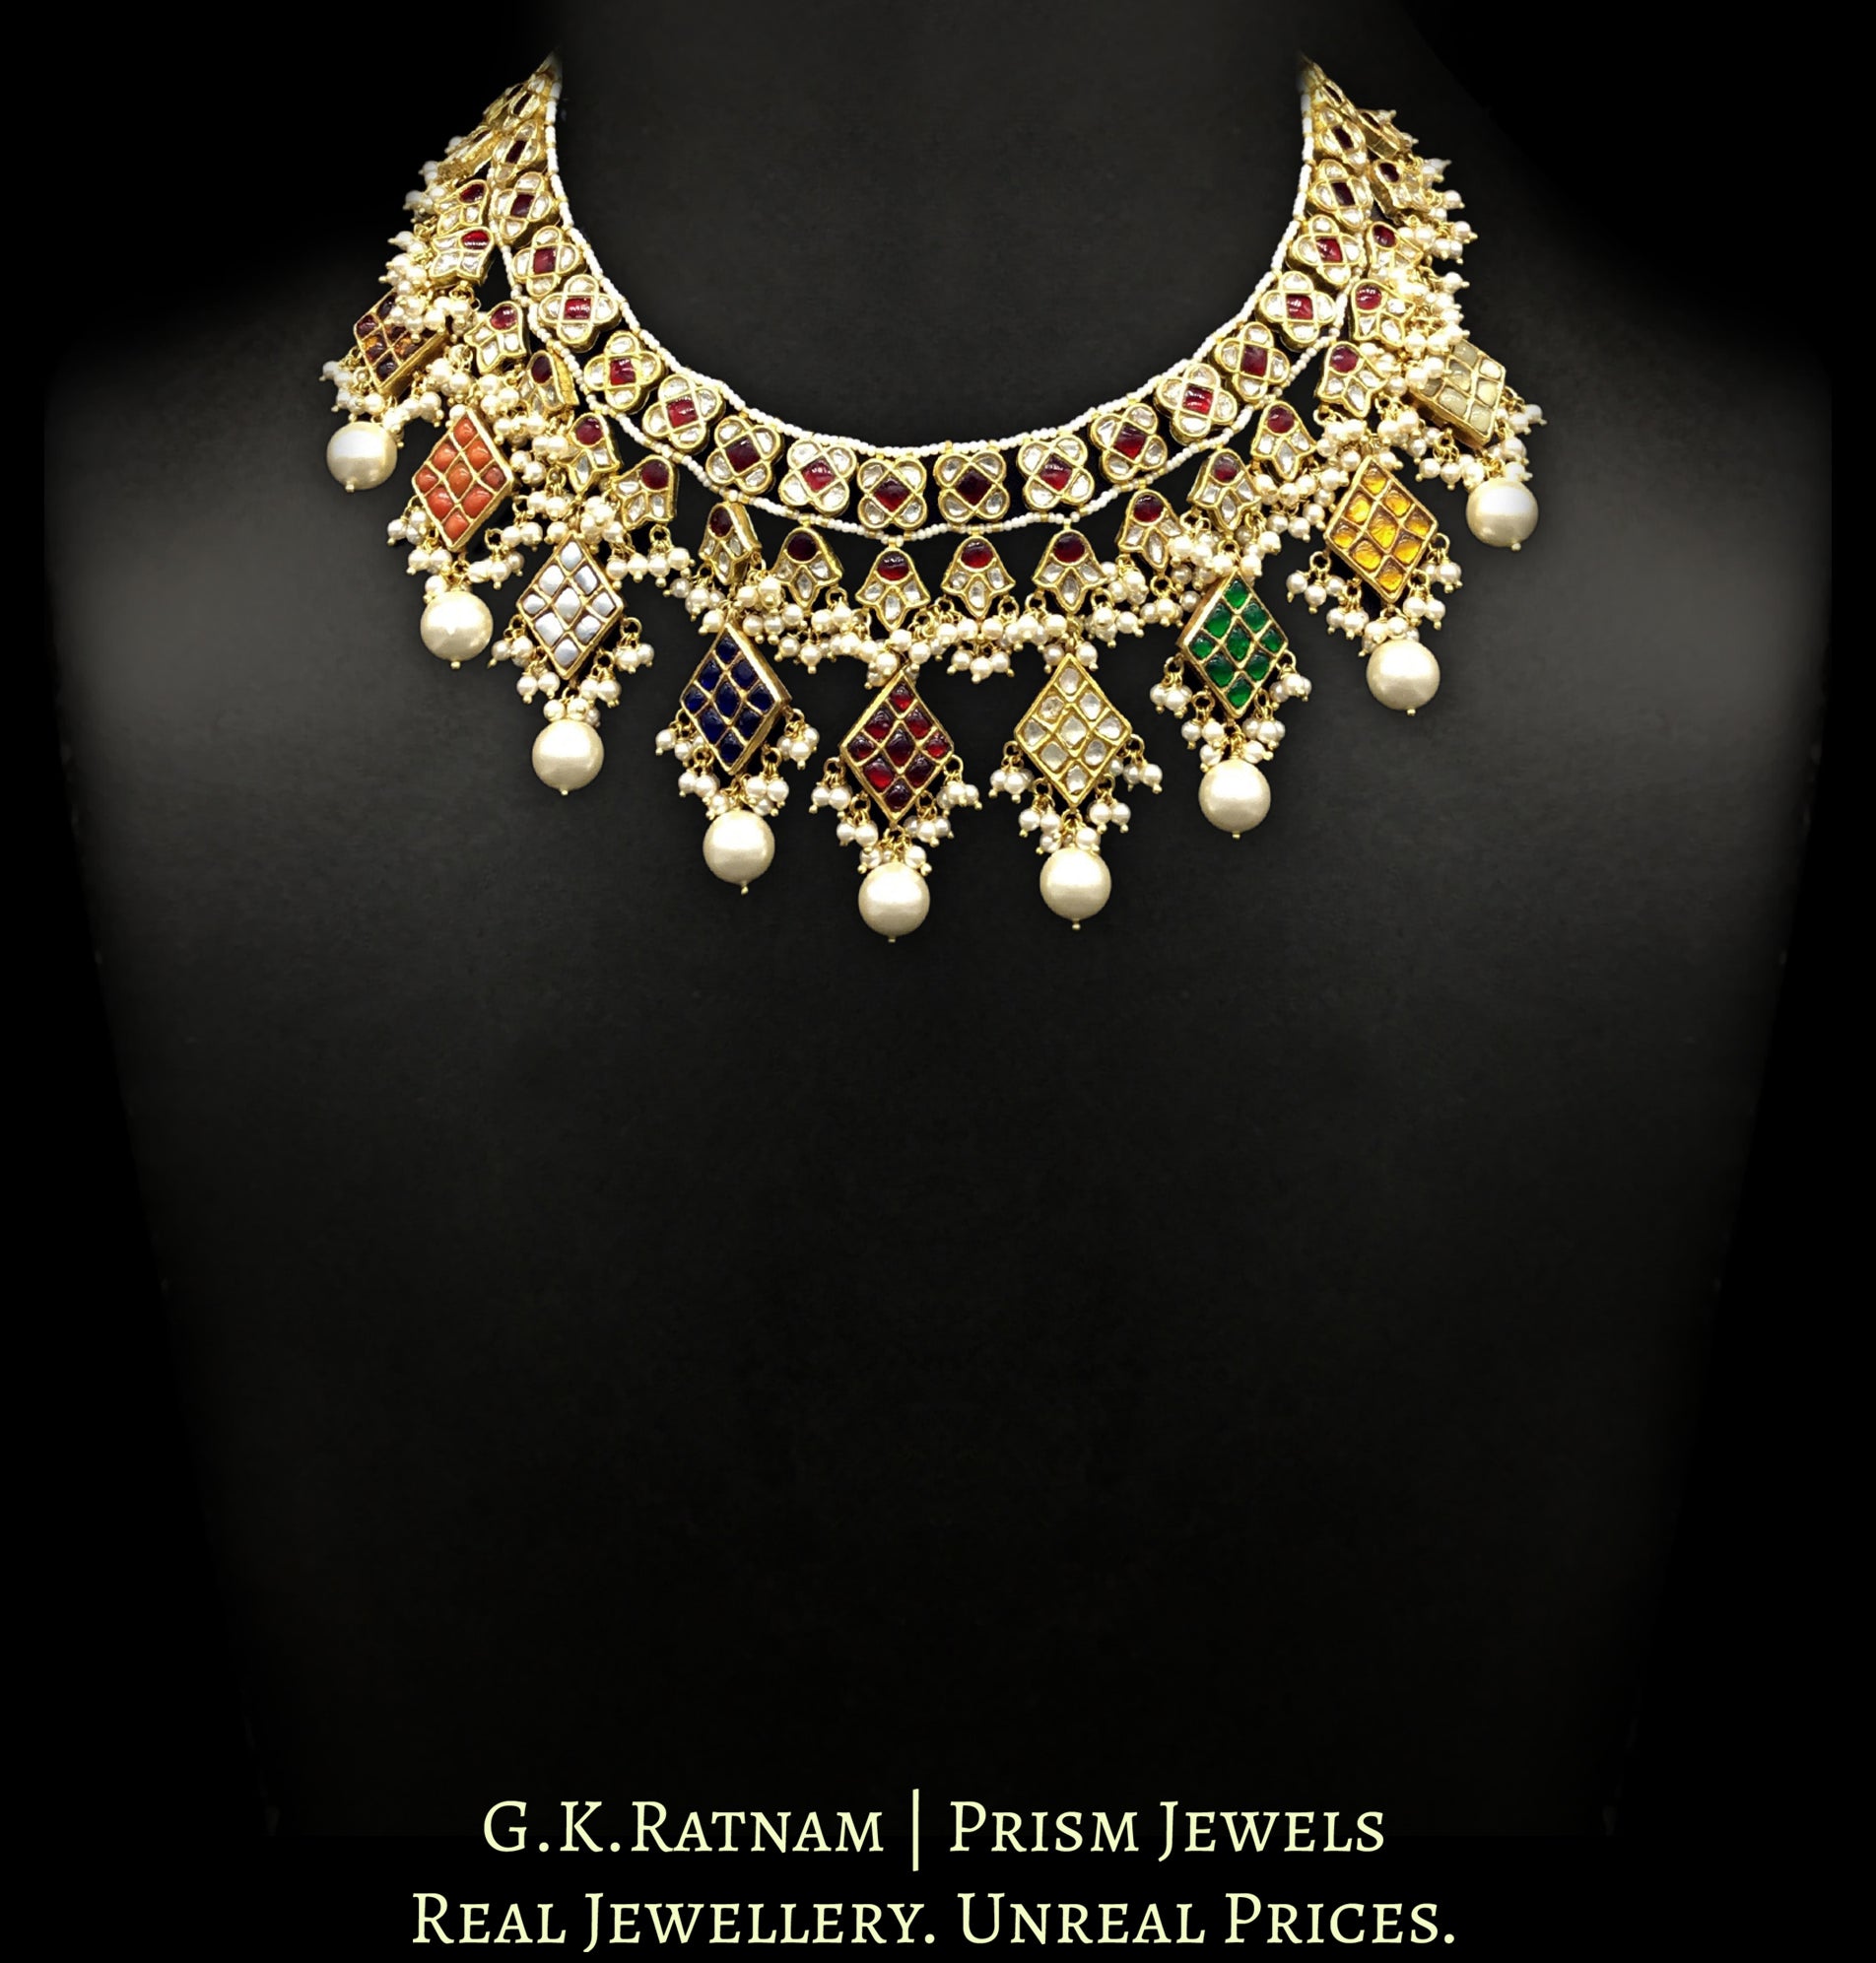 22k Gold and Diamond Polki Navratna Necklace Set with lustrous pearl clusters